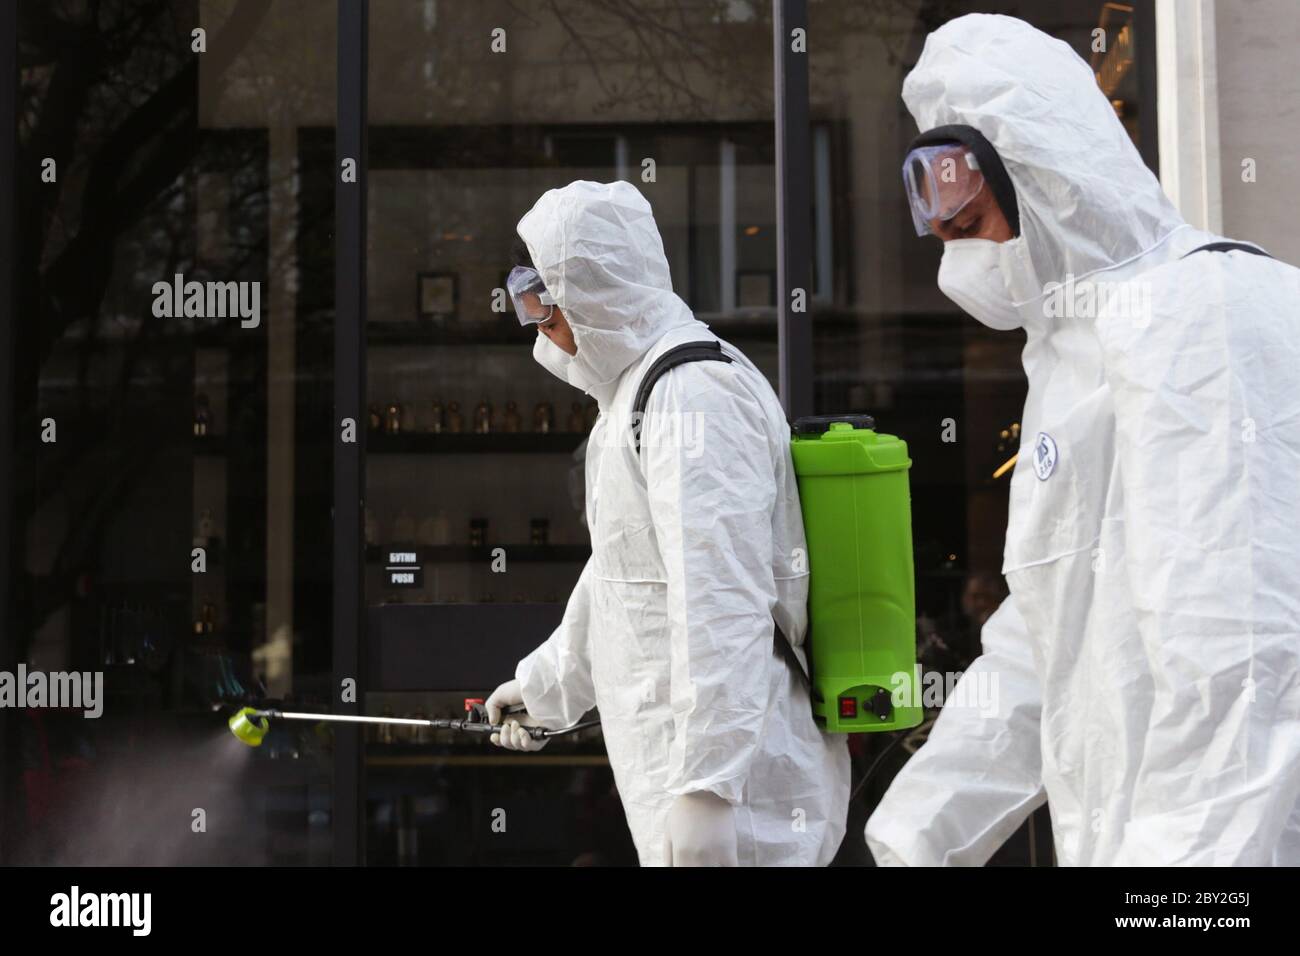 Sofia, Bulgaria - 11 April, 2020: Workers spray disinfectant outside on a street against the spread of coronavirus disease COVID-19. Stock Photo